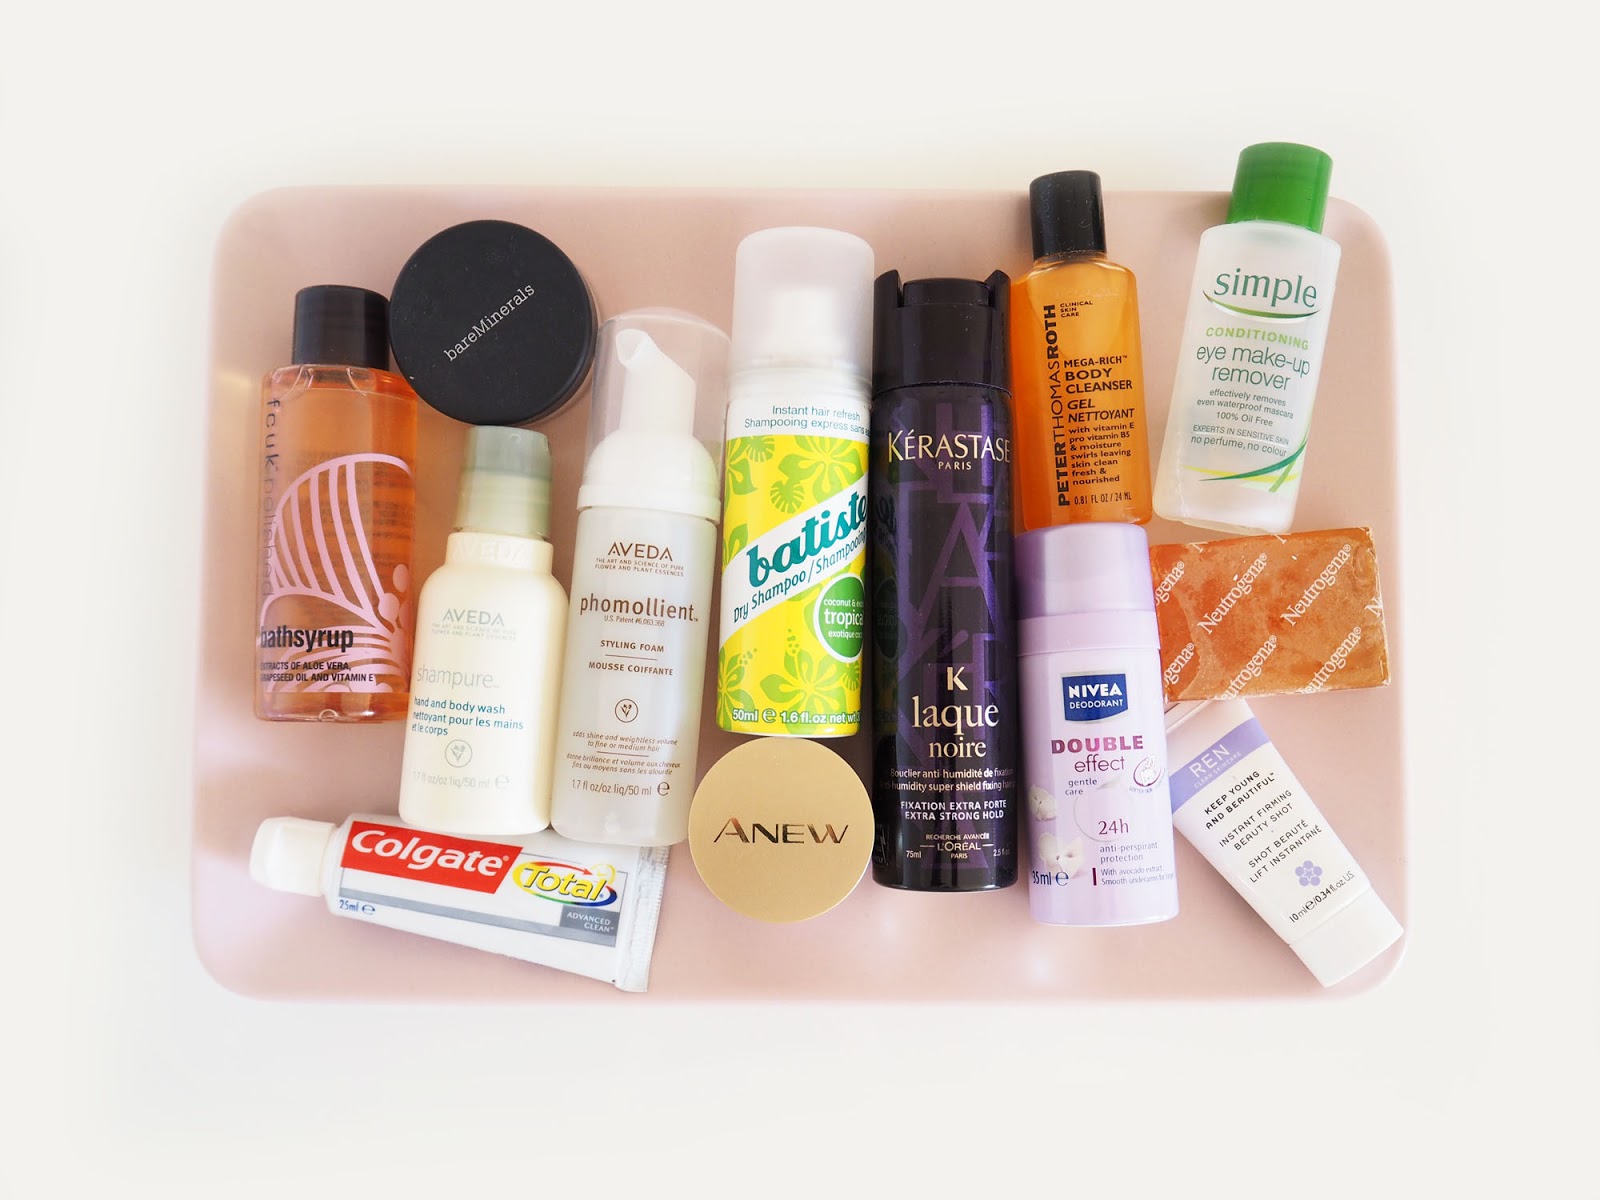 How Your Unused Make Up and Toiletries Can Help Vulnerable Women - Give & Make Up